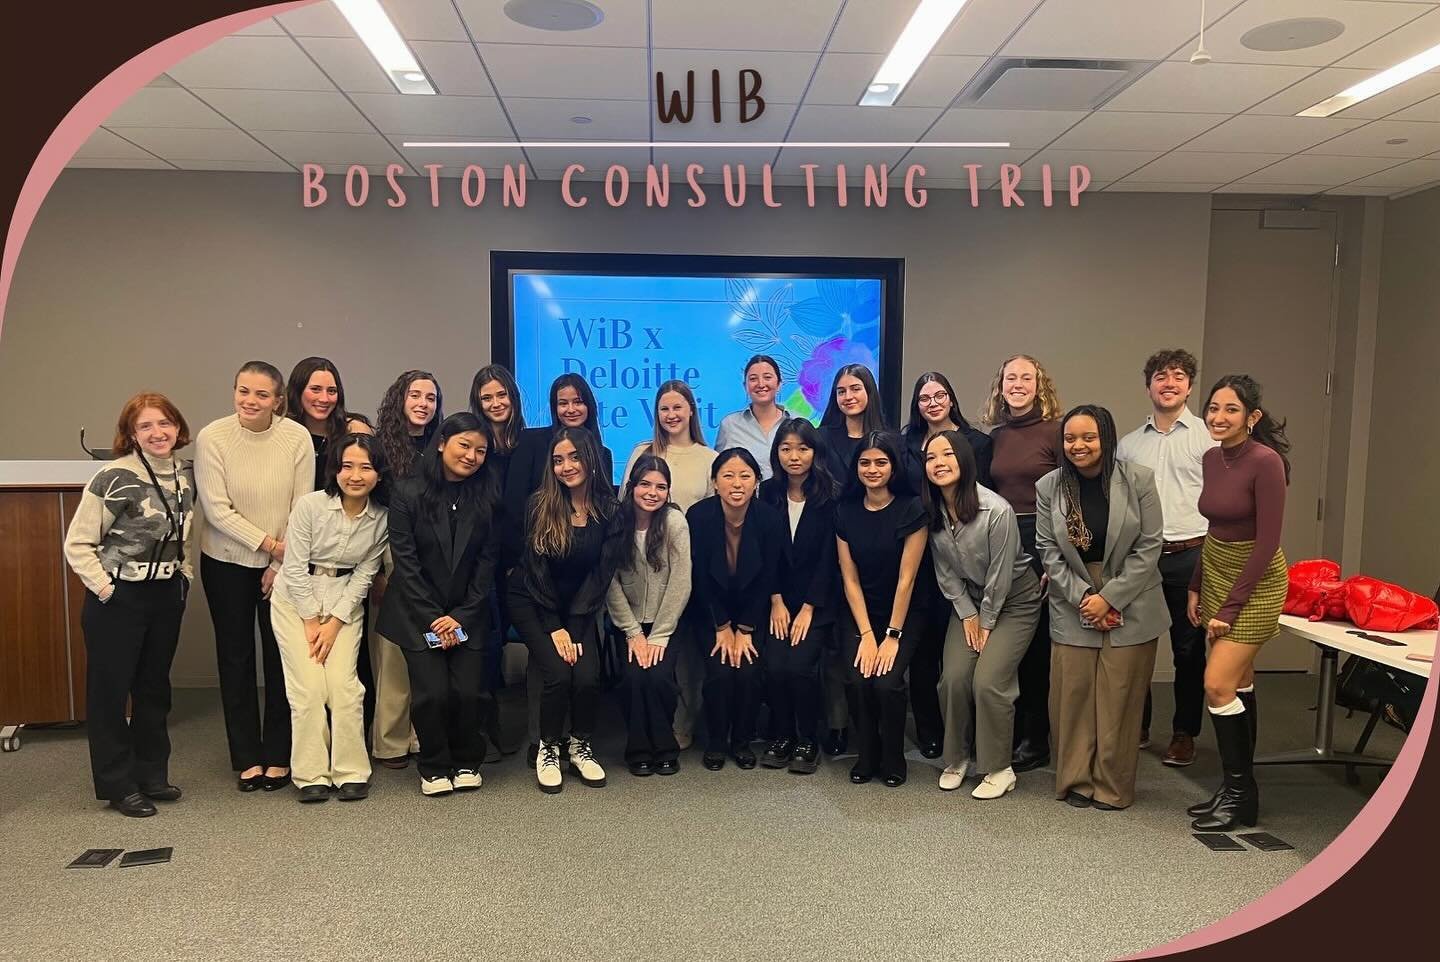 A highlight from our Boston Consulting Trip earlier this semester where we visited the offices of McKinsey and Company, Bain and Company, and Deloitte. For more off-campus exploration and networking opportunities, keep a lookout on our newsletter and